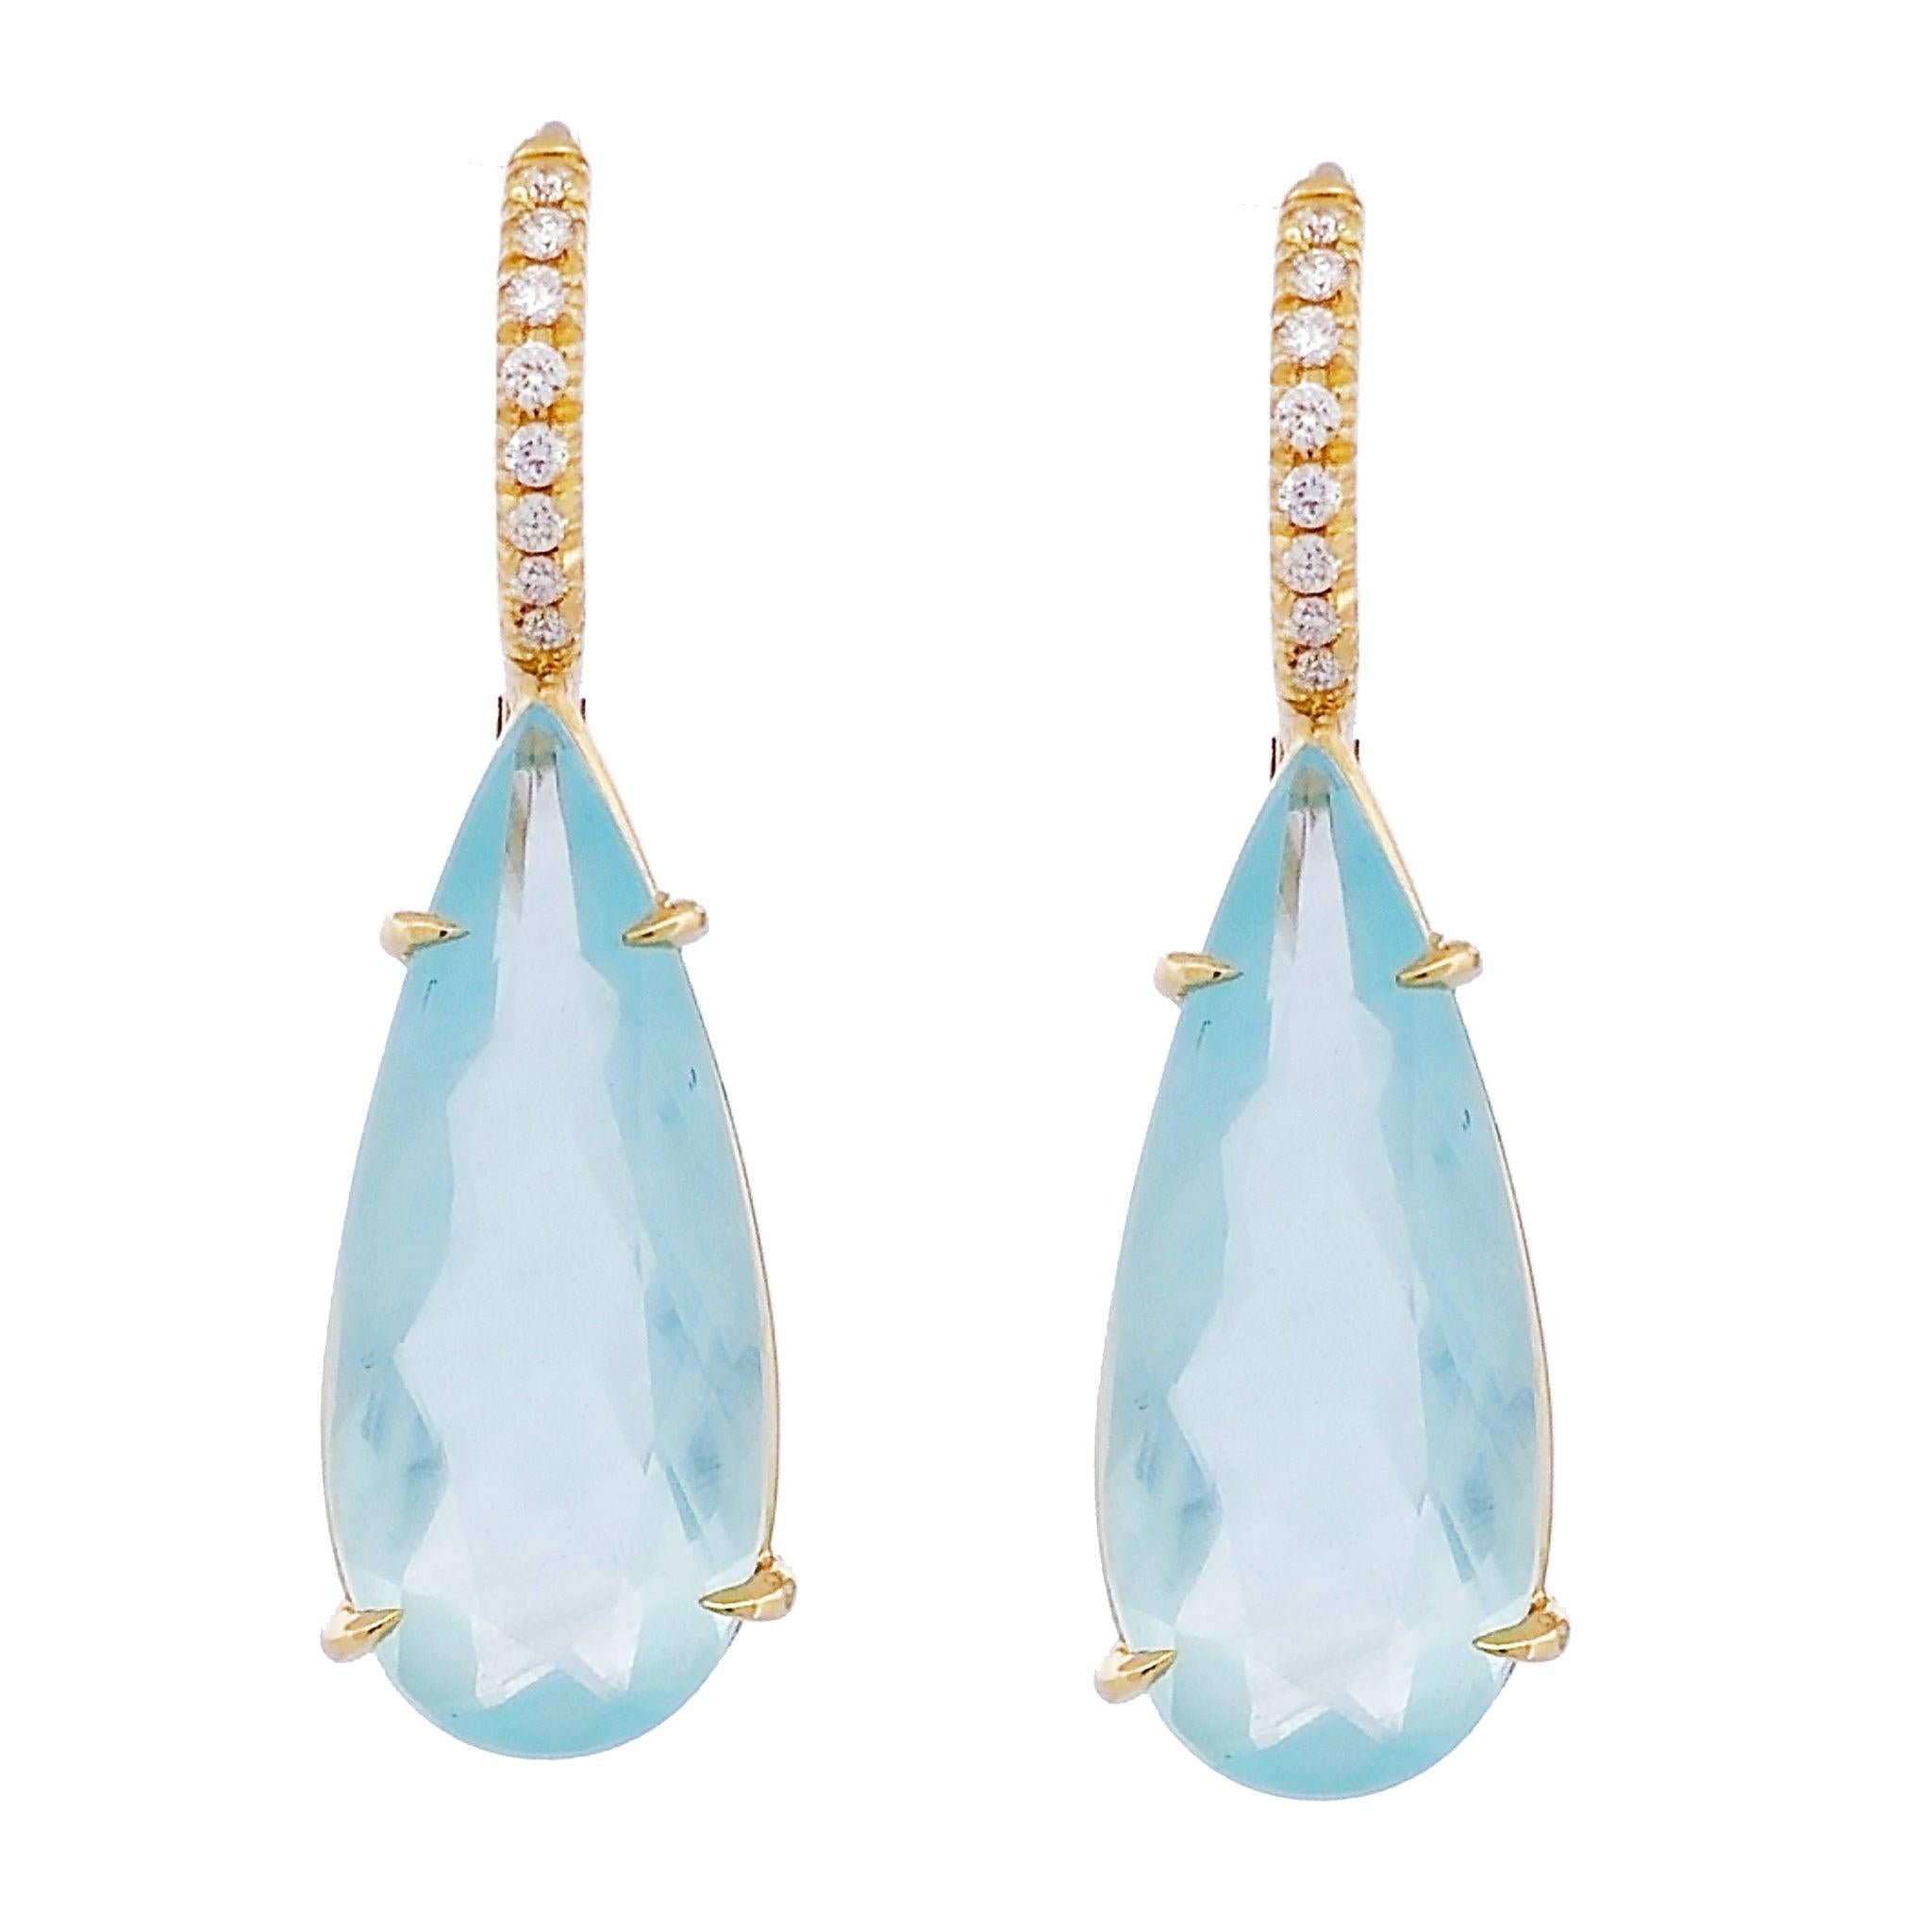 Handmade Milky Aquamarine Yellow Gold Diamond Pave Drop Earrings In New Condition For Sale In Miami, FL